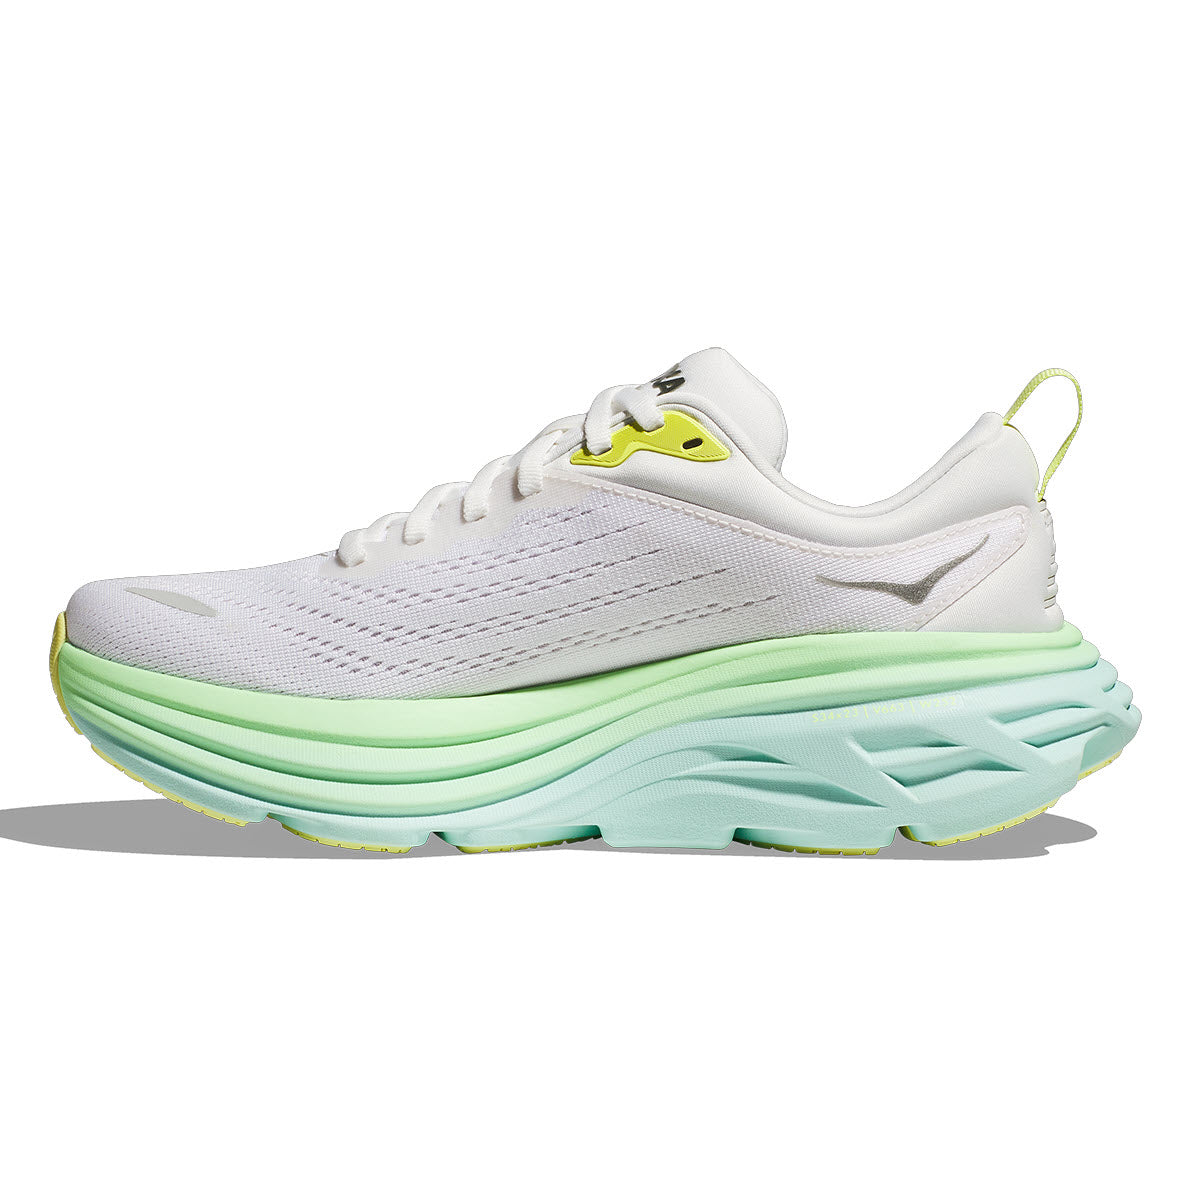 A modern running shoe with a white upper and a layered green sole featuring a prominent swoosh logo on the side, designed with extended heel geometry, like the Hoka Bondi 8 Blanc de Blanc/Sunlit Ocean - Womens by Hoka.